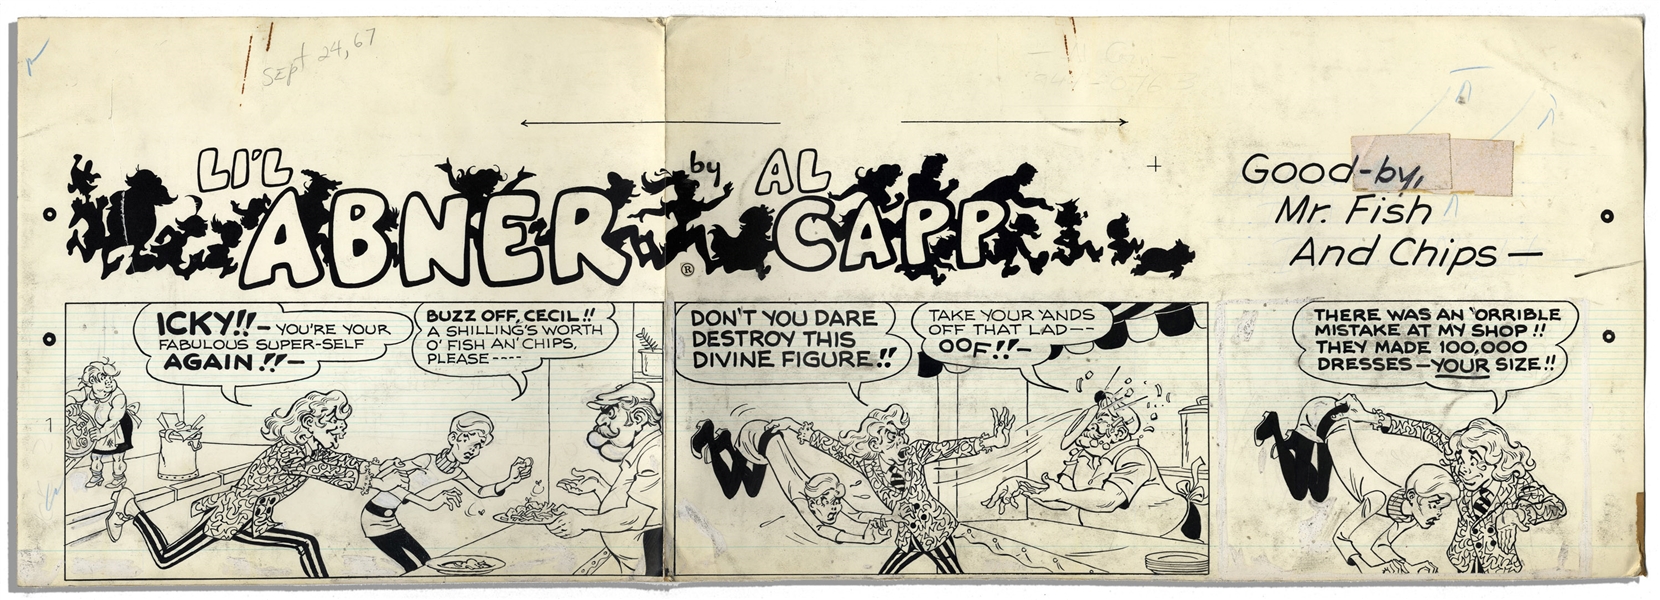 ''Li'l Abner'' Sunday Strip Hand-Drawn & Signed by Al Capp From 24 September 1967 -- Spoofing Ultra-Thin Models -- 29'' x 22.5'' on 3 Separated Strips -- Very Good -- From the Al Capp Estate